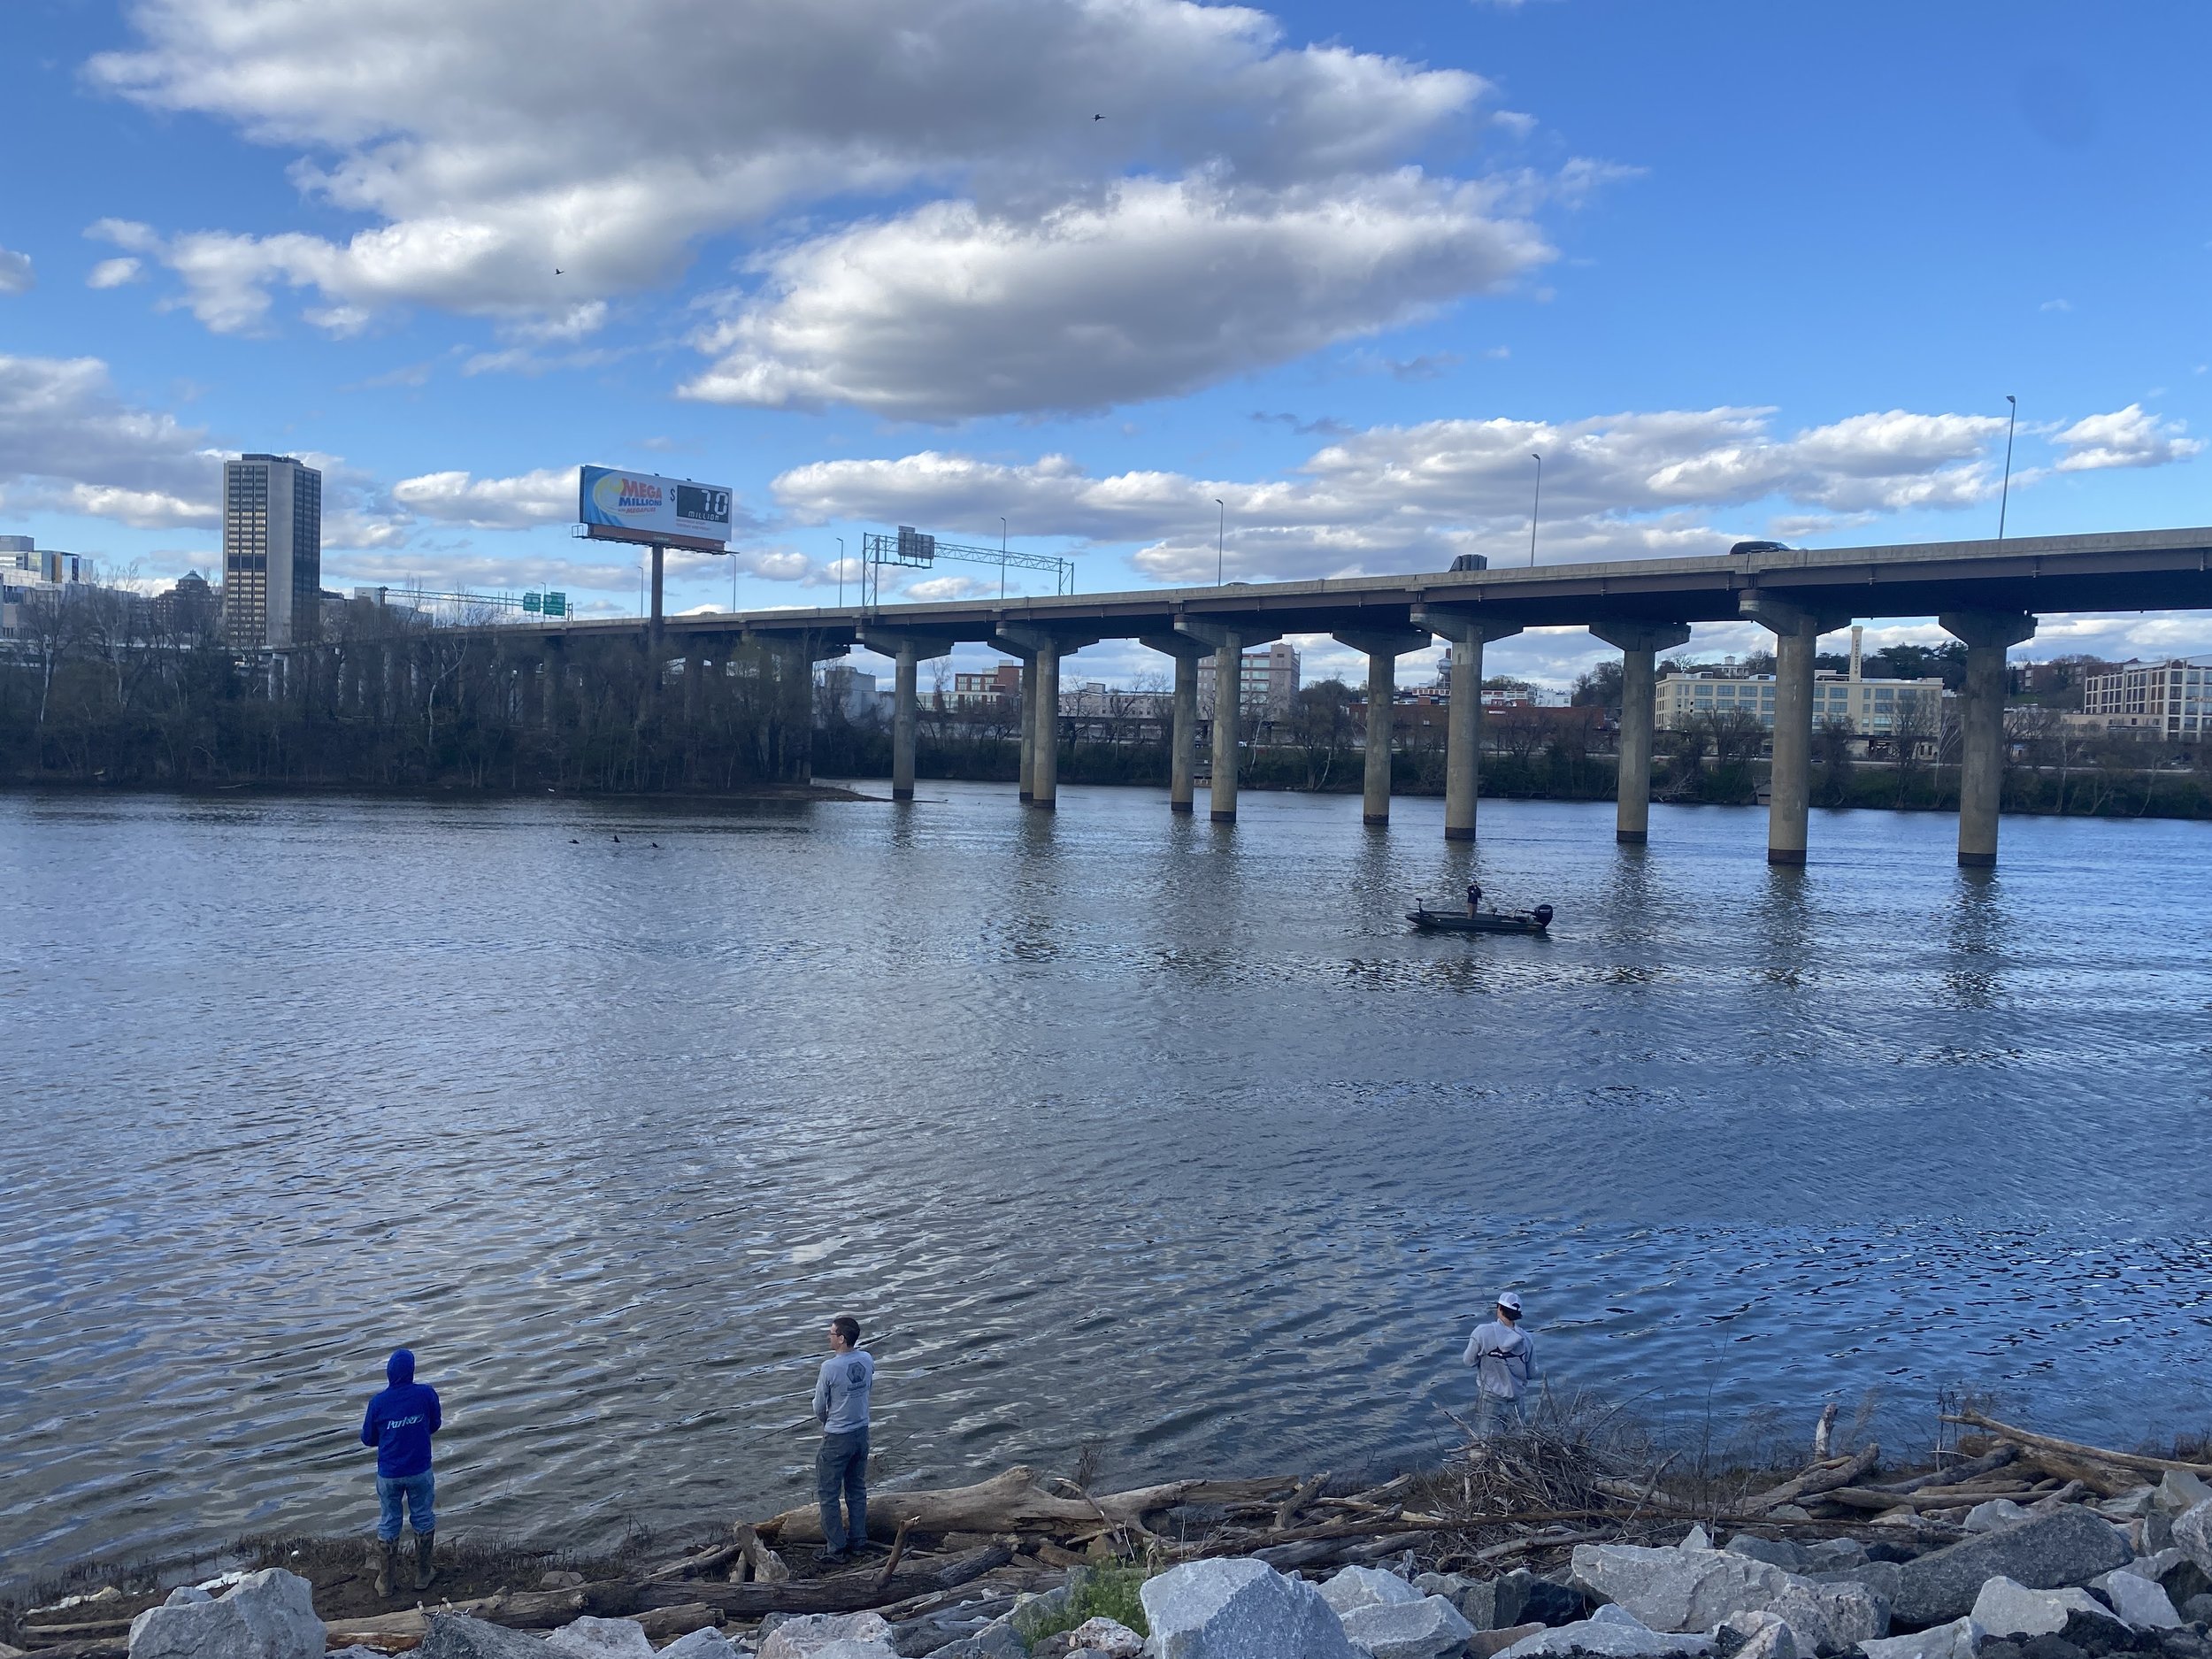 How to fish for shad in the James River — RVA James River Fishing Report